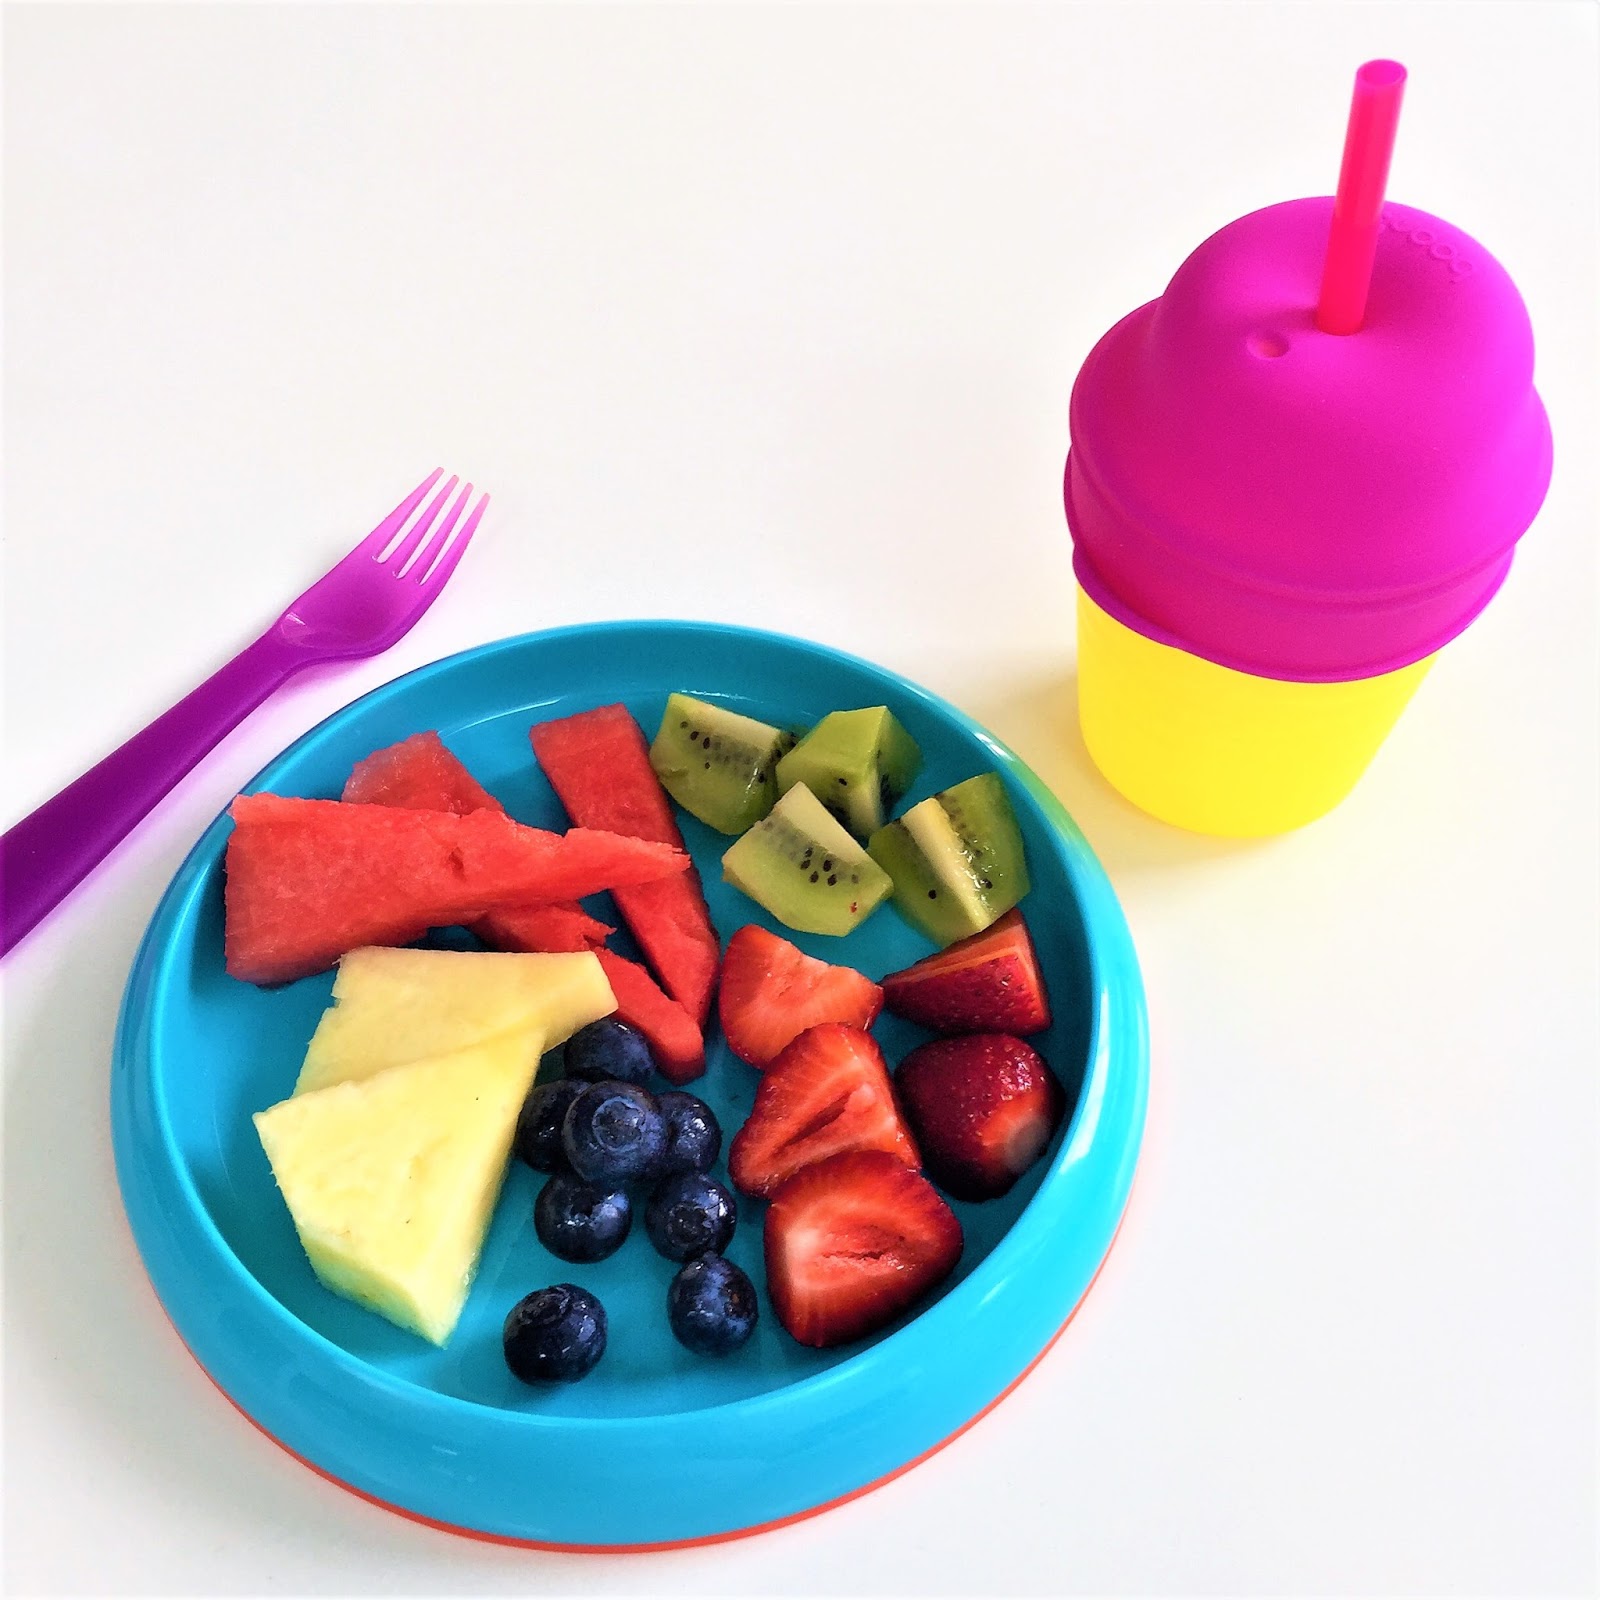 PRODUCT REVIEW: BOON INC PLATES AND SNUG STRAWS